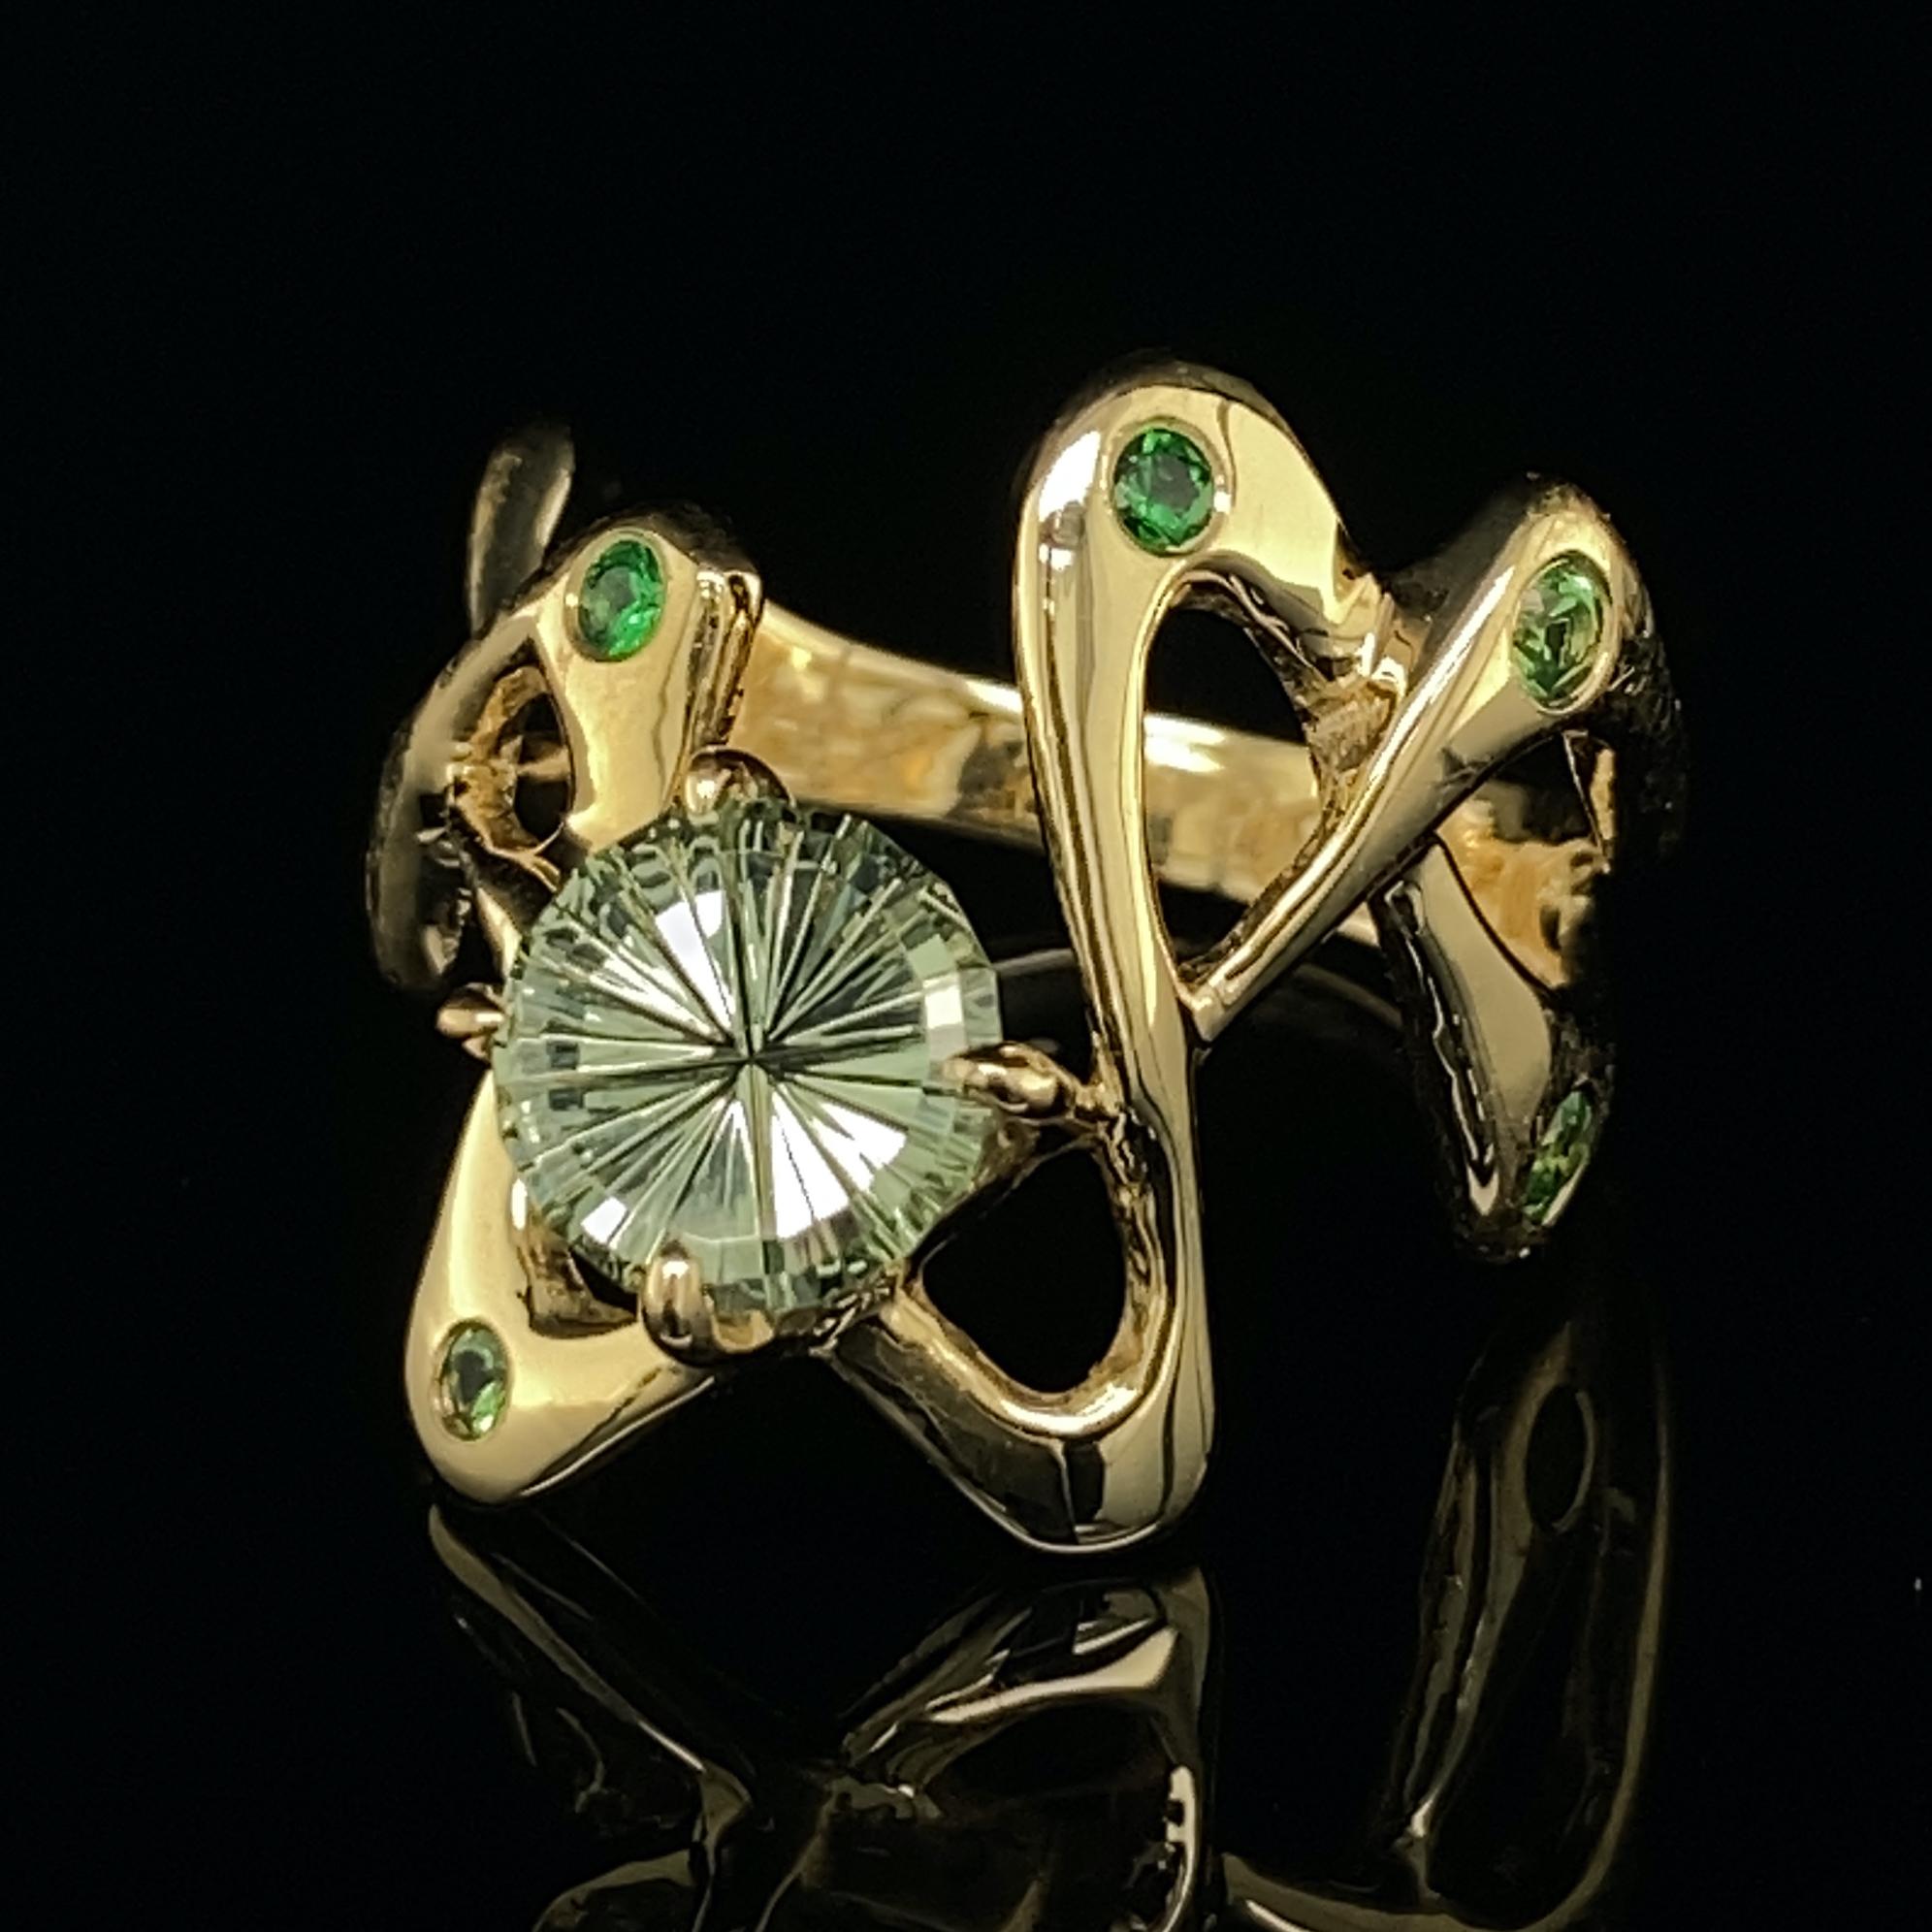 This outstanding ring boasts artistry from two master craftsmen:  the ring is by Eytan Brandes -- a freeform doodle of 18 karat gold dotted with six vivid green tsavorite garnets.  The main stone is a Montana sapphire cut by award-winning gemcutter